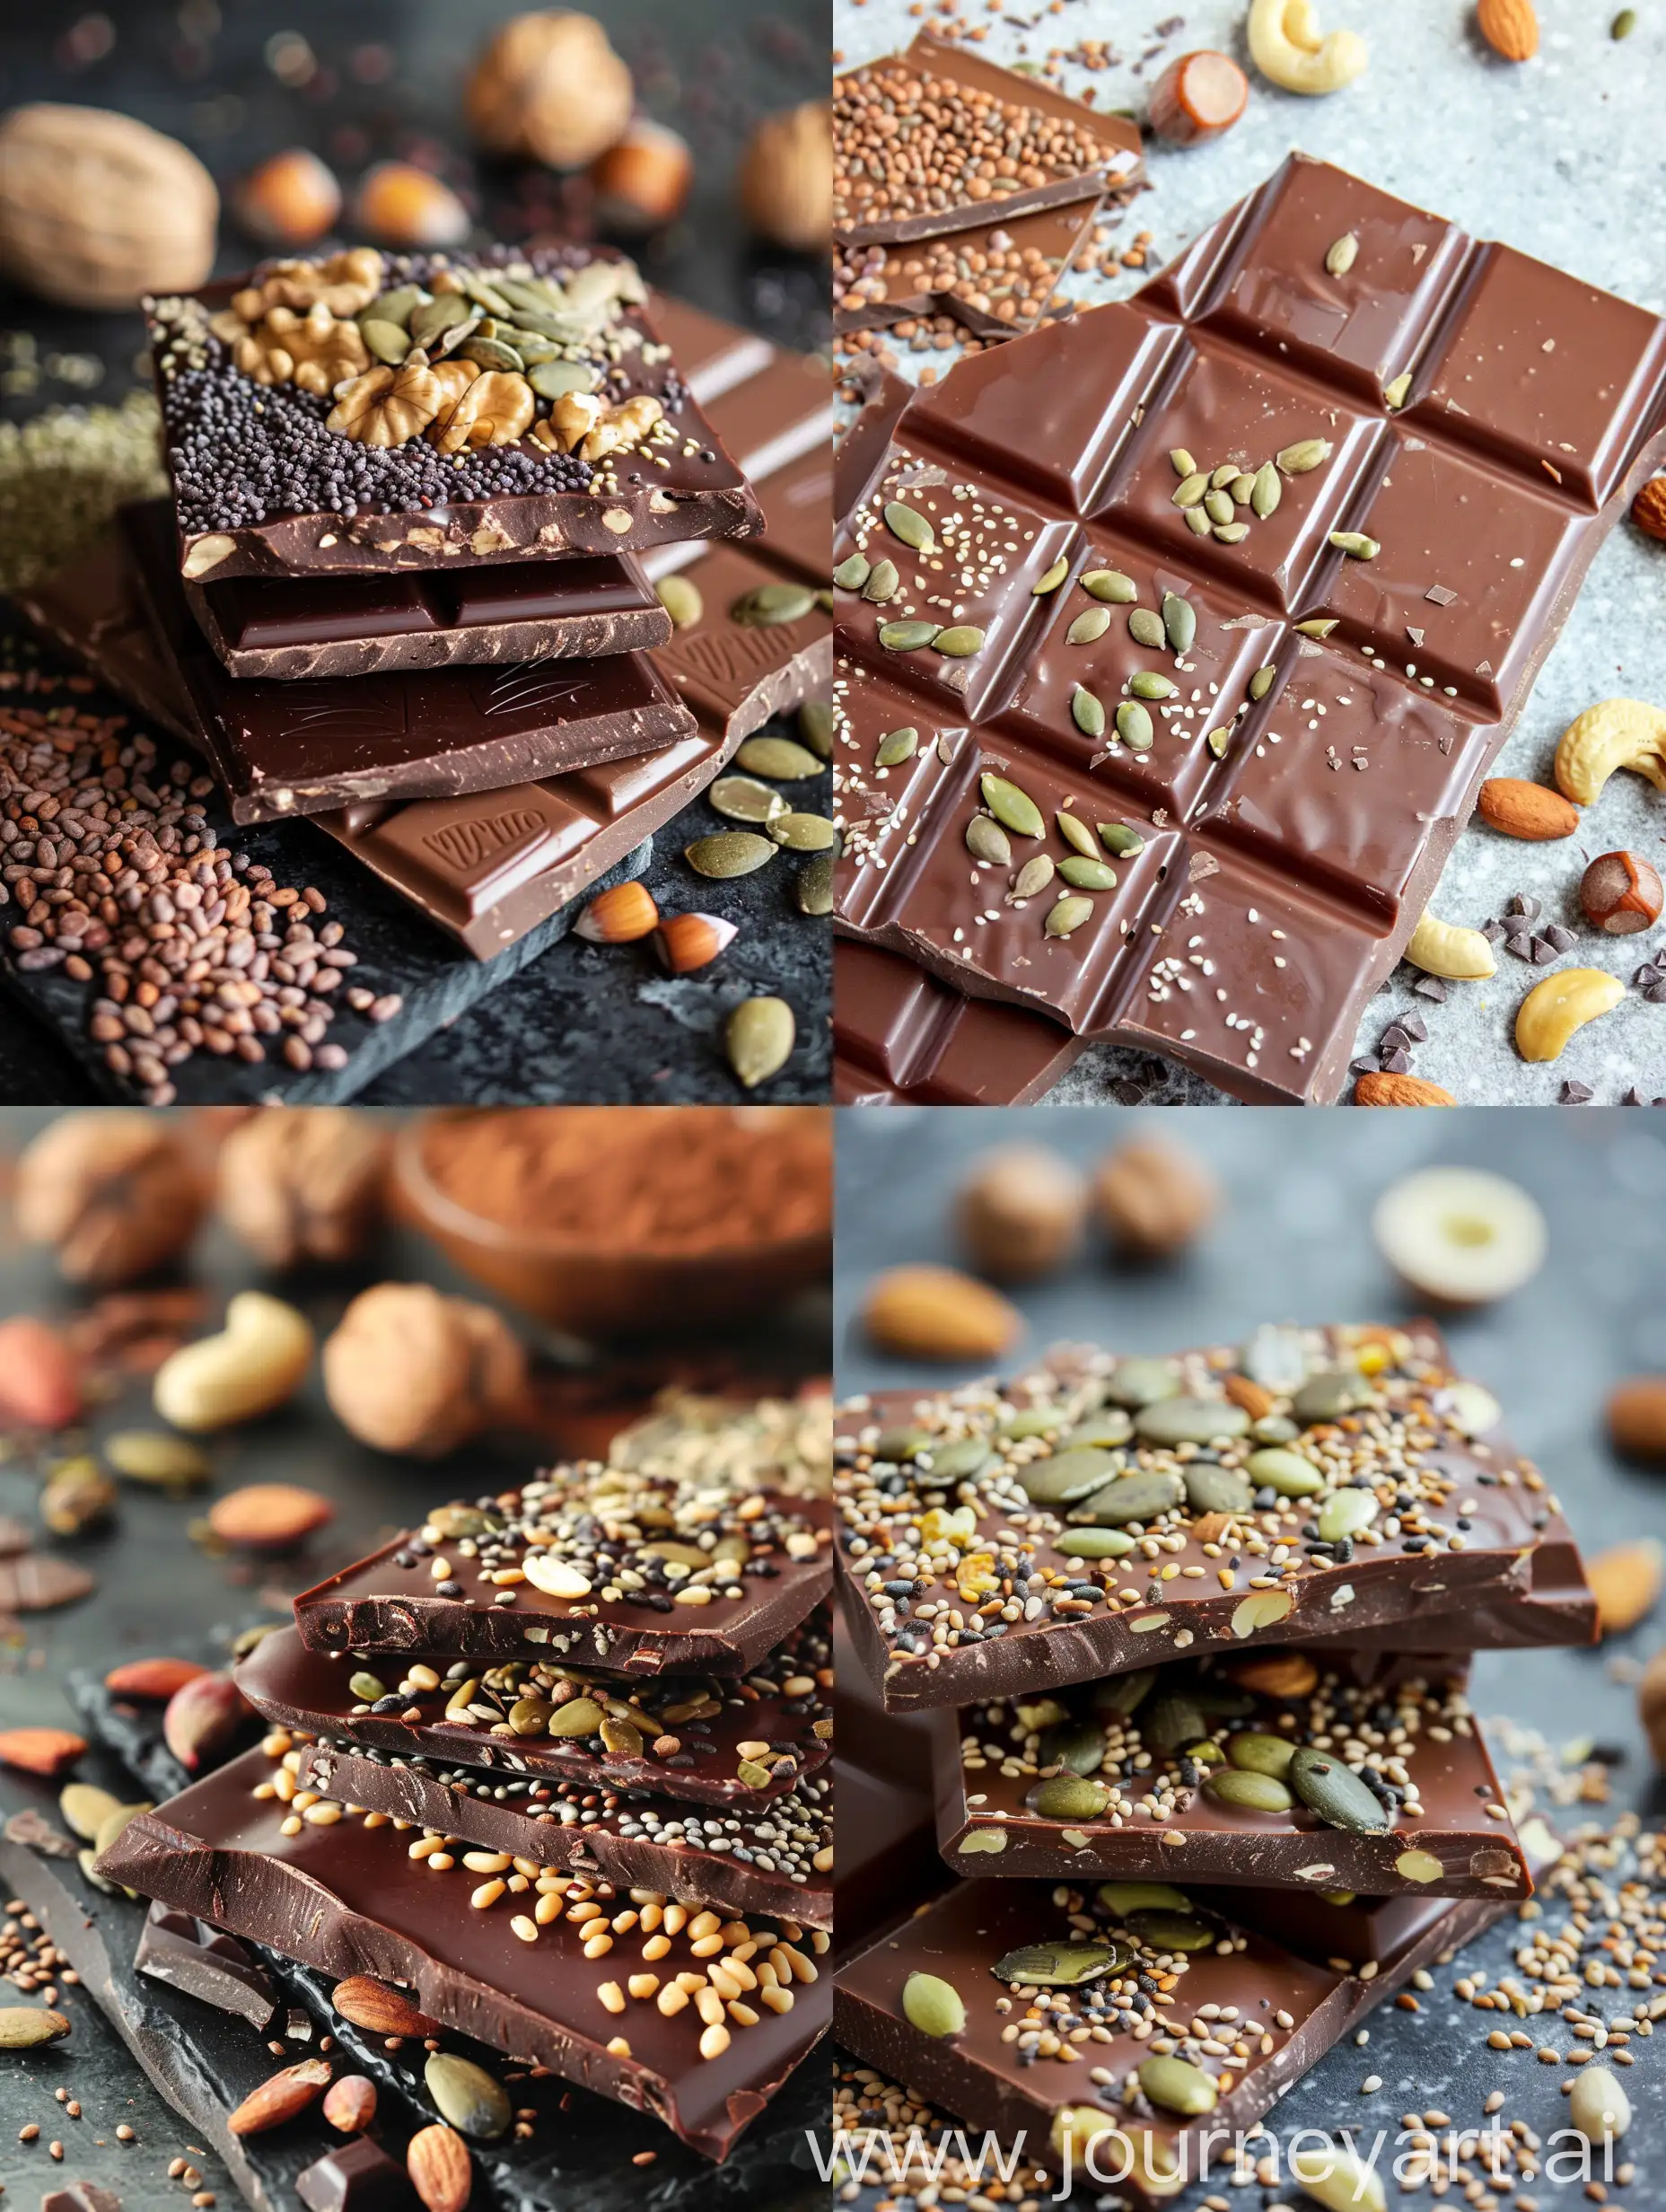 Irresistible-Chocolate-Confectionery-with-Nuts-and-Seeds